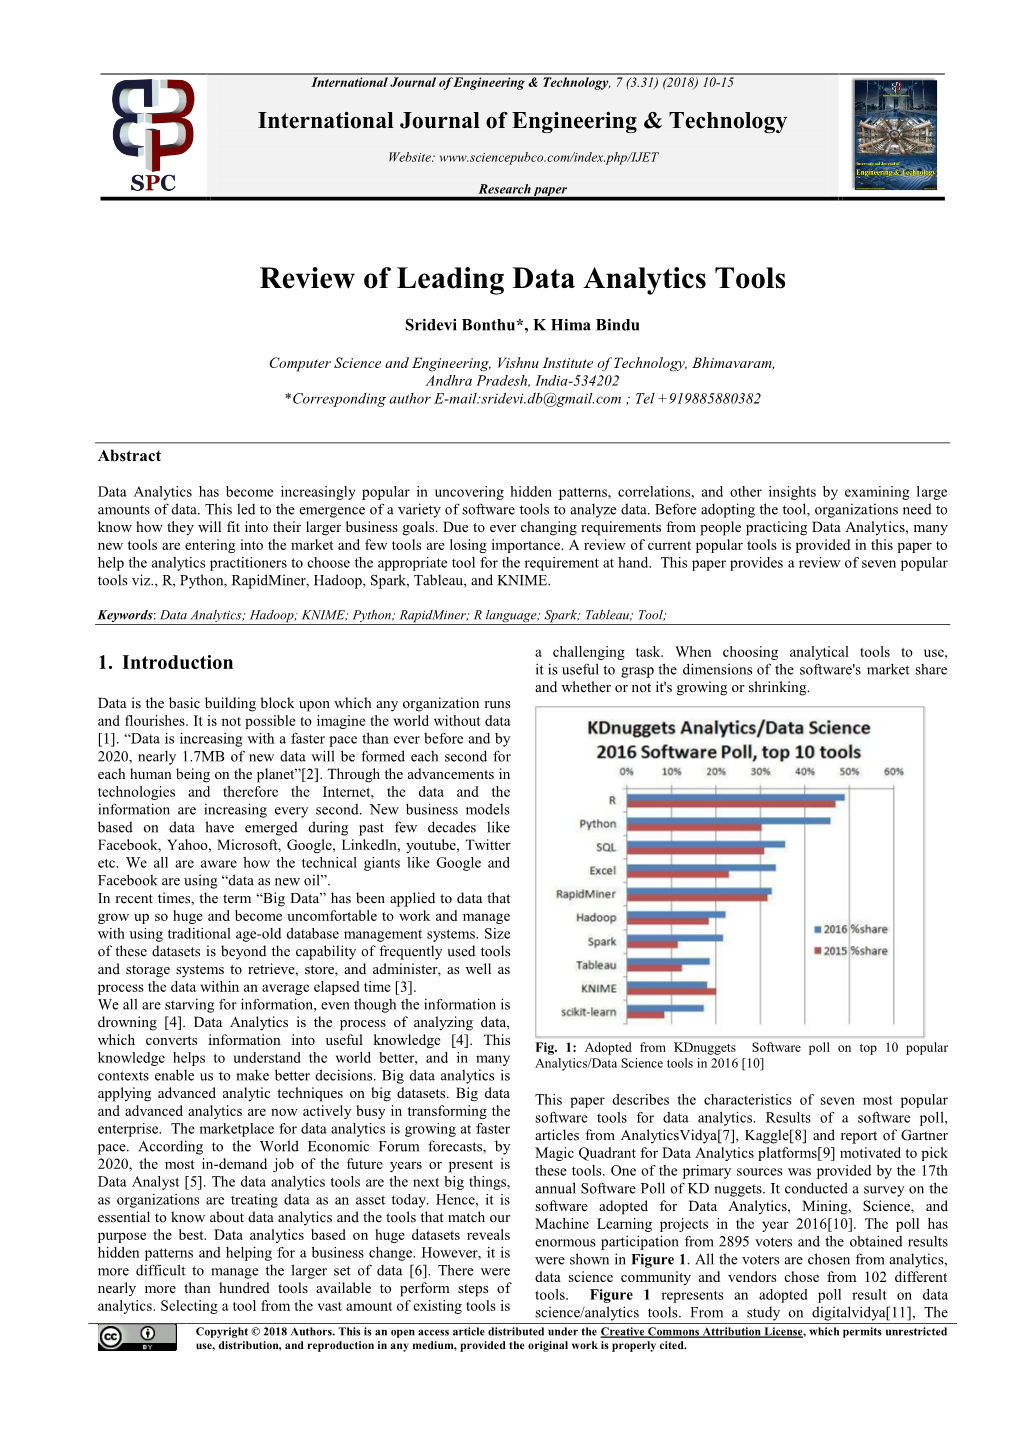 Review of Leading Data Analytics Tools